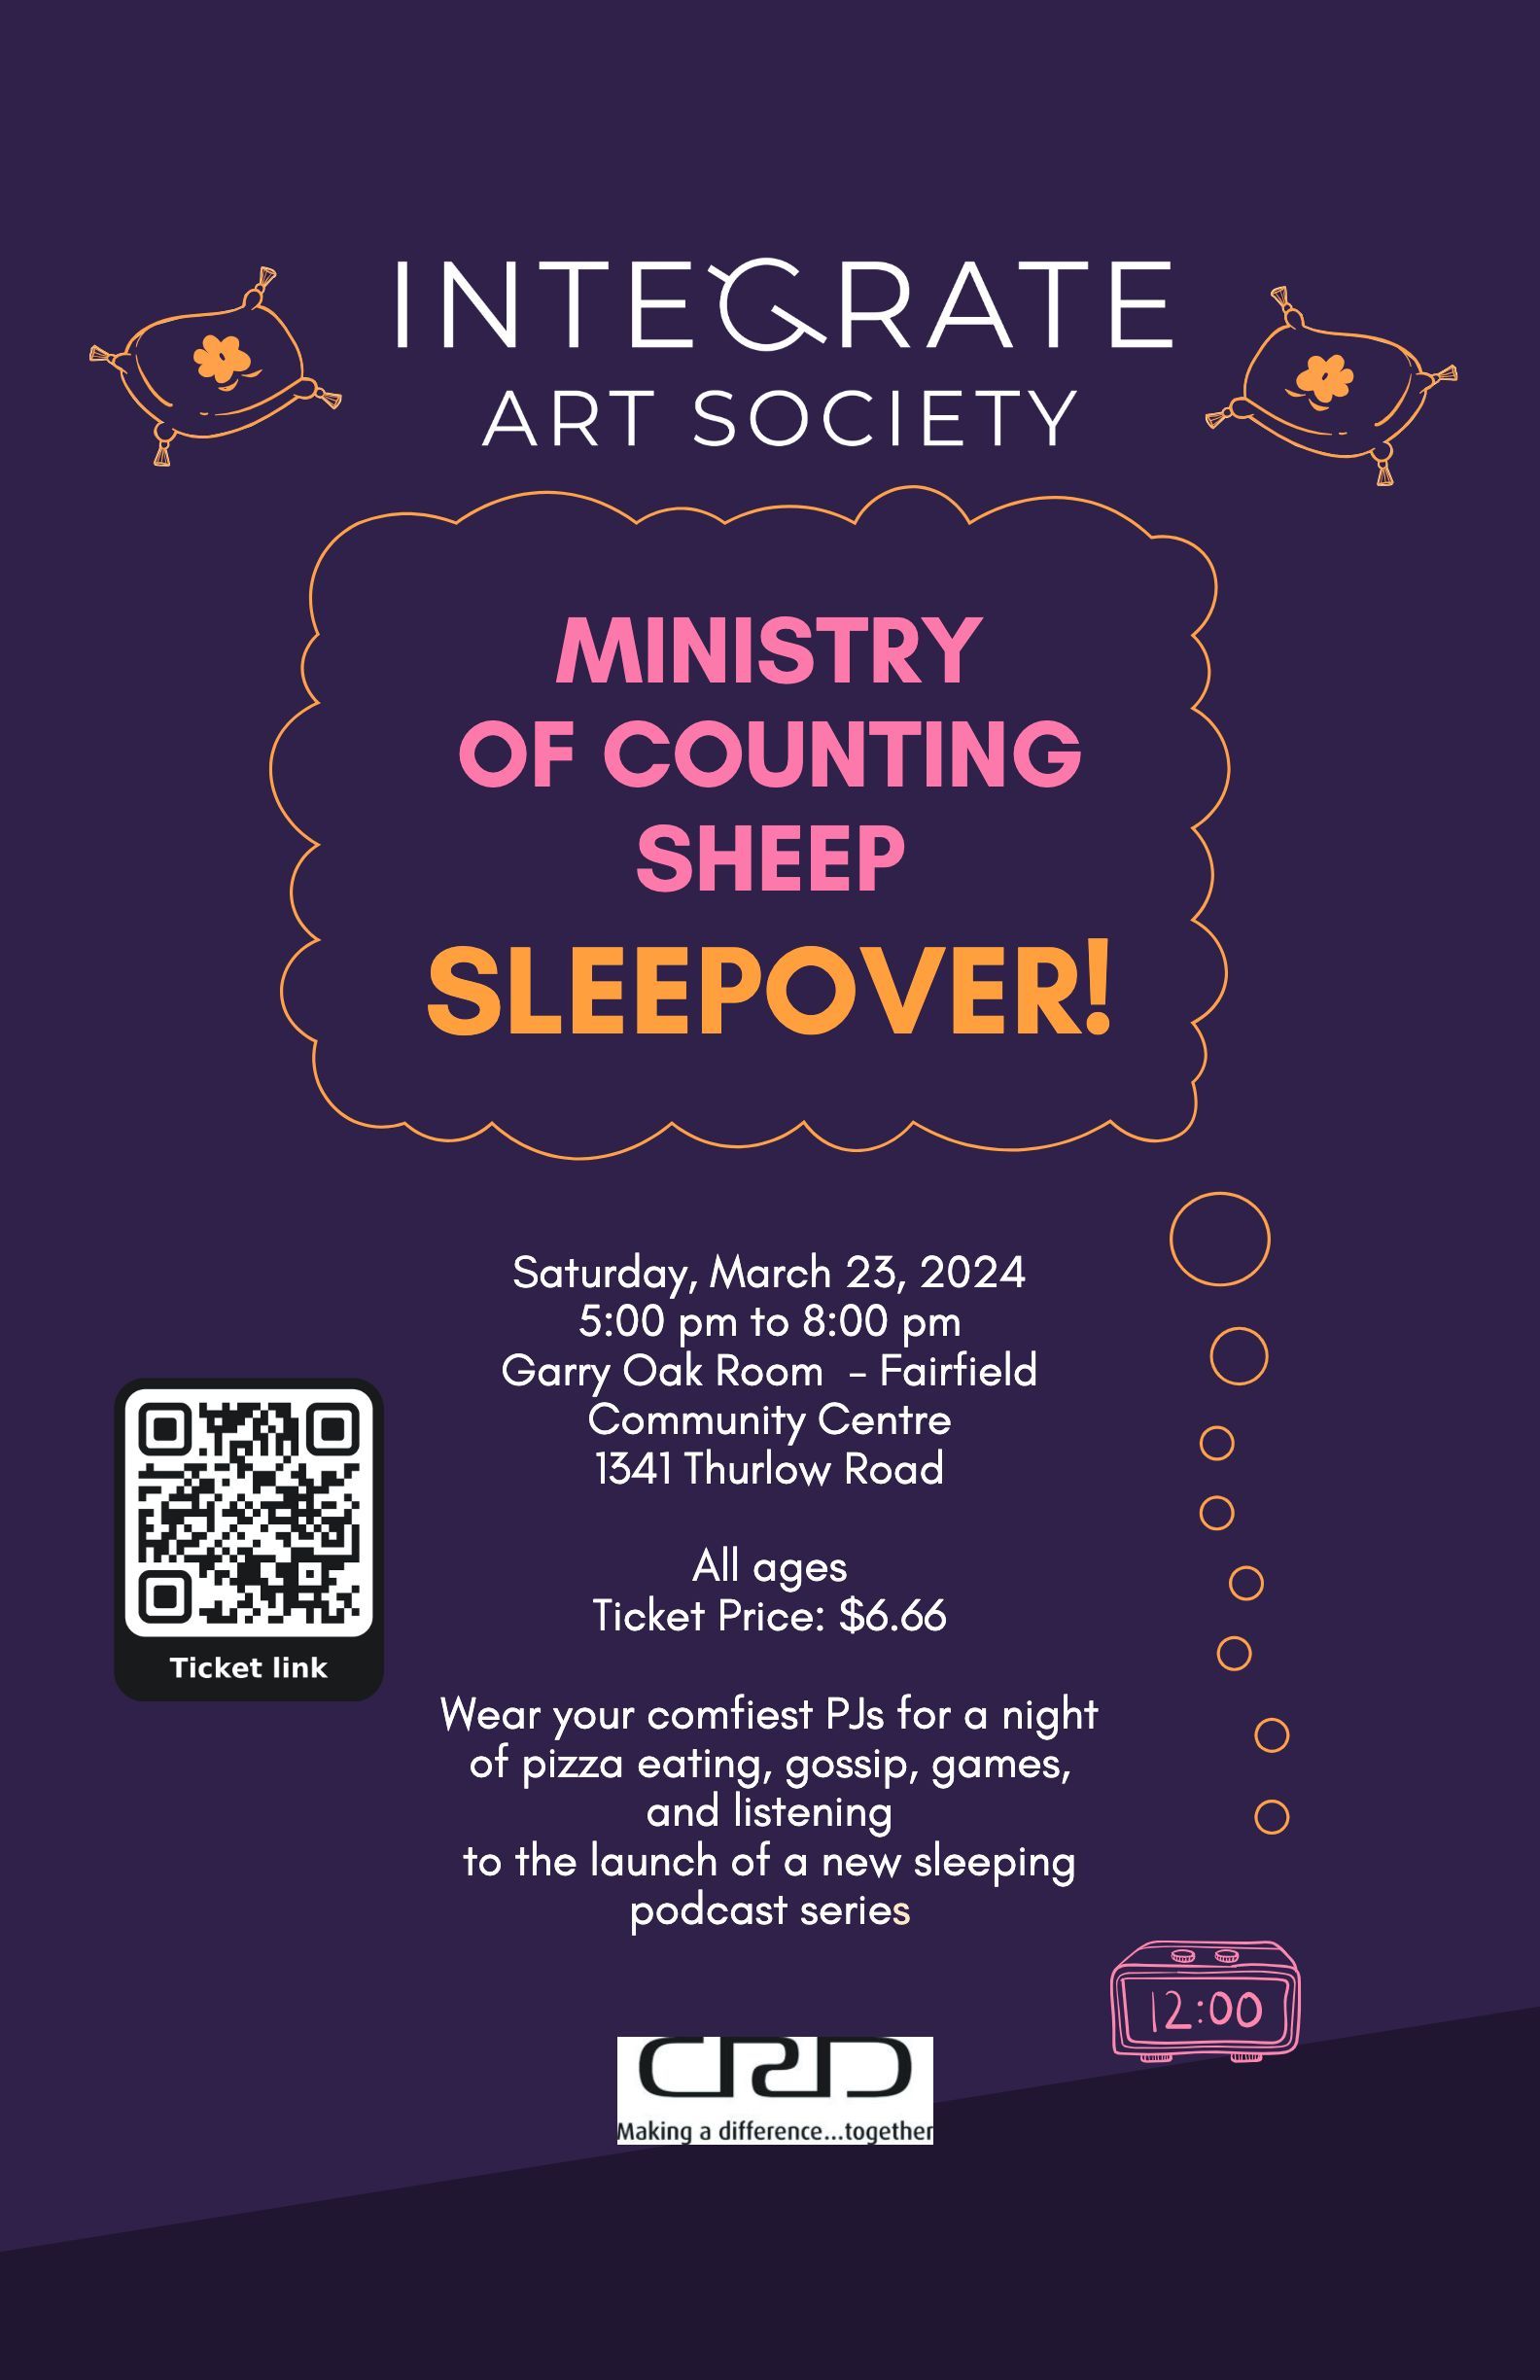 Ministry of Counting Sheep - 11 x 17 poster